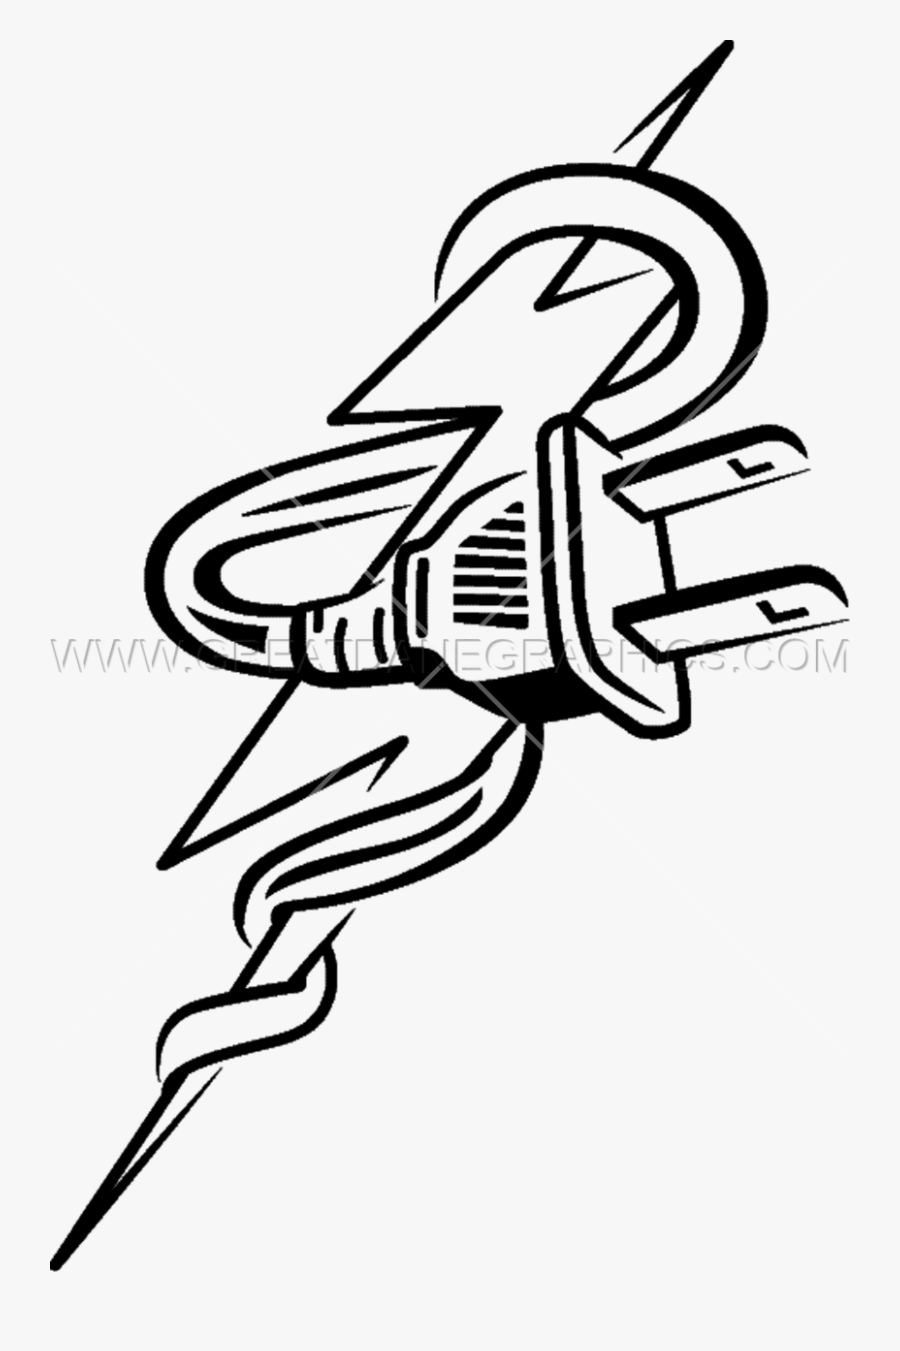 Drawing At Getdrawings Com - Lightning Bolt And Plug, Transparent Clipart